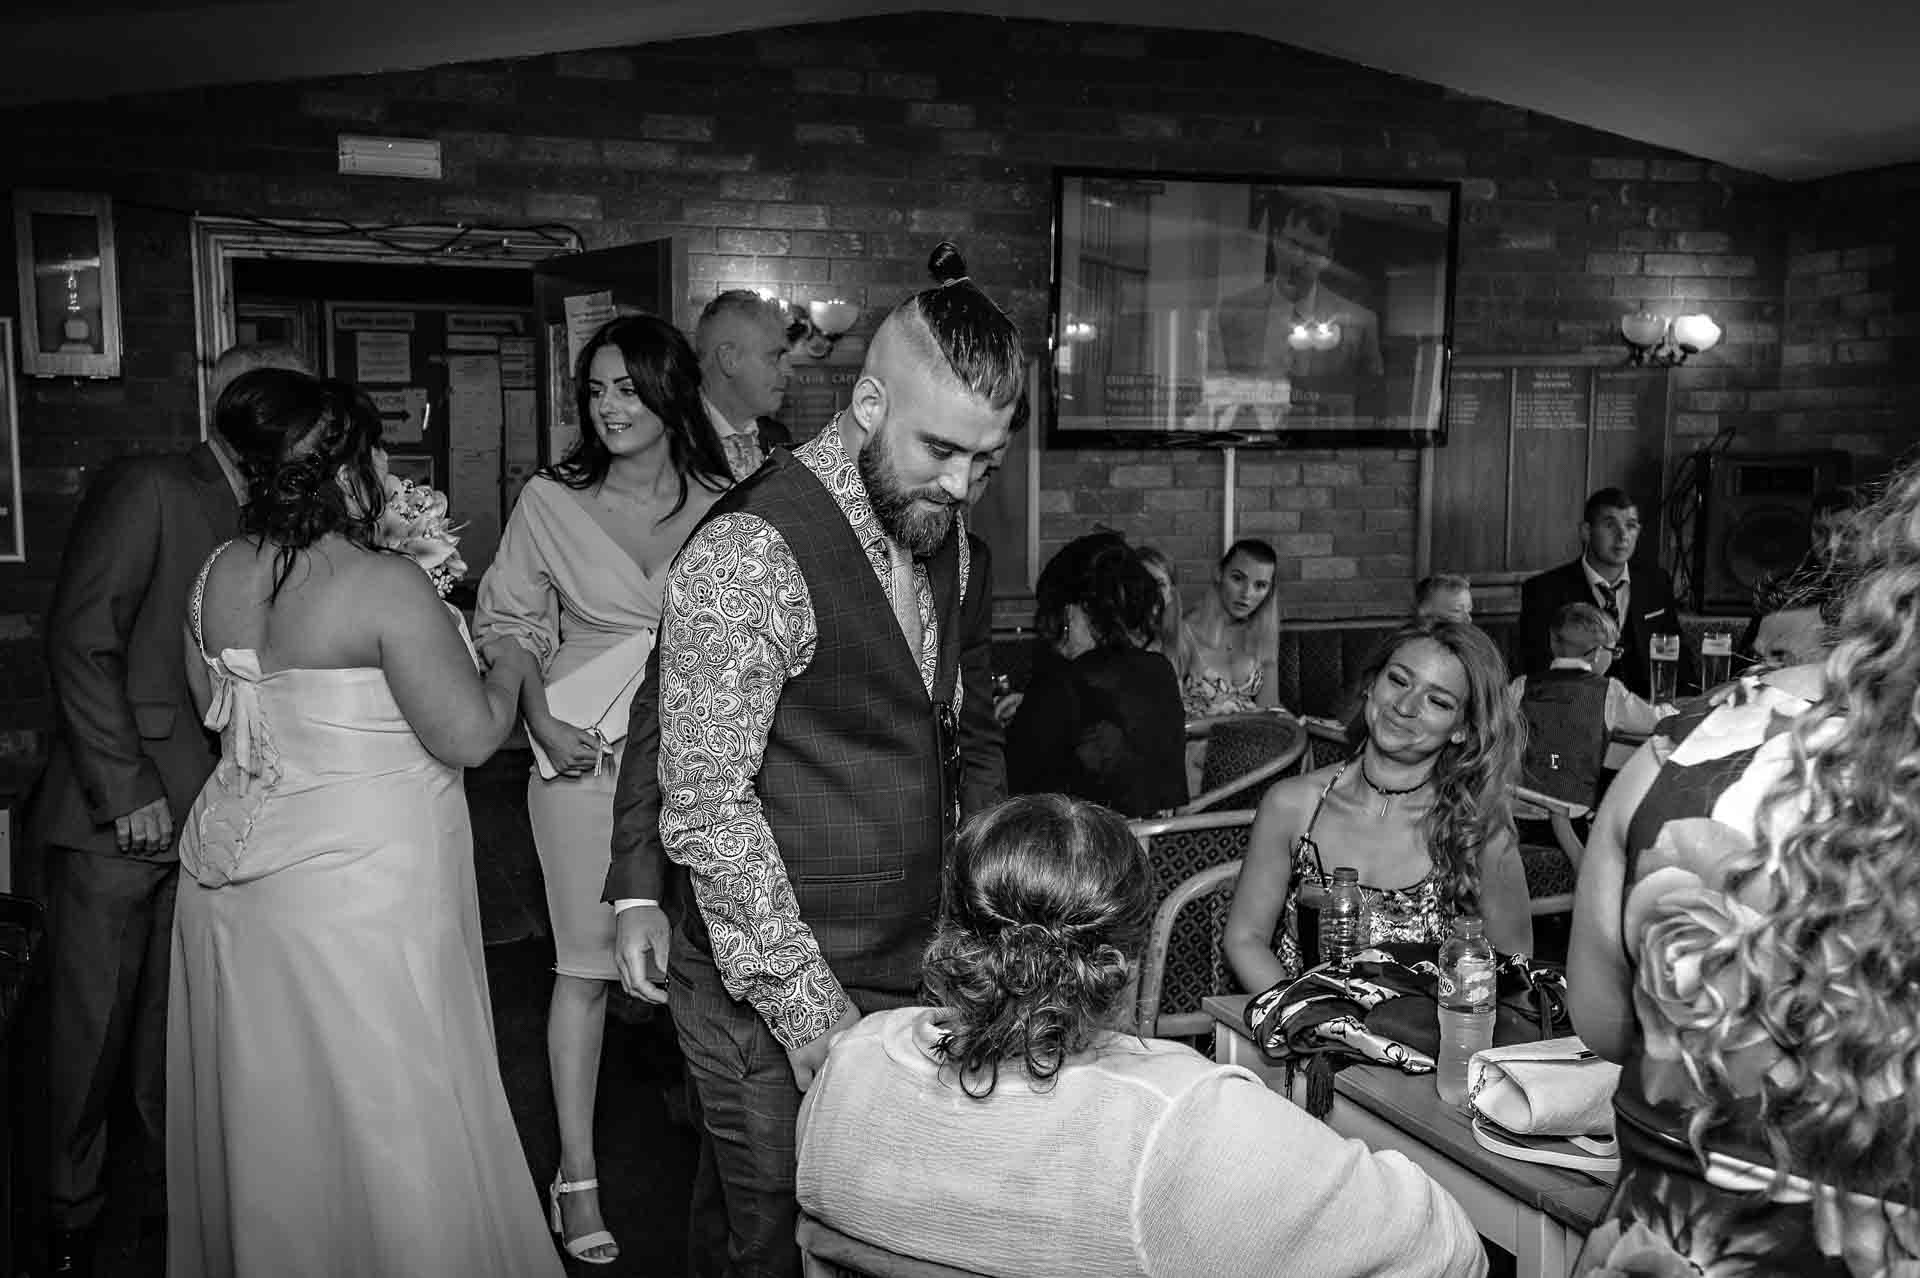 Guests mingle in club house after wedding at the Ridgeway Golf Club in Caerphilly